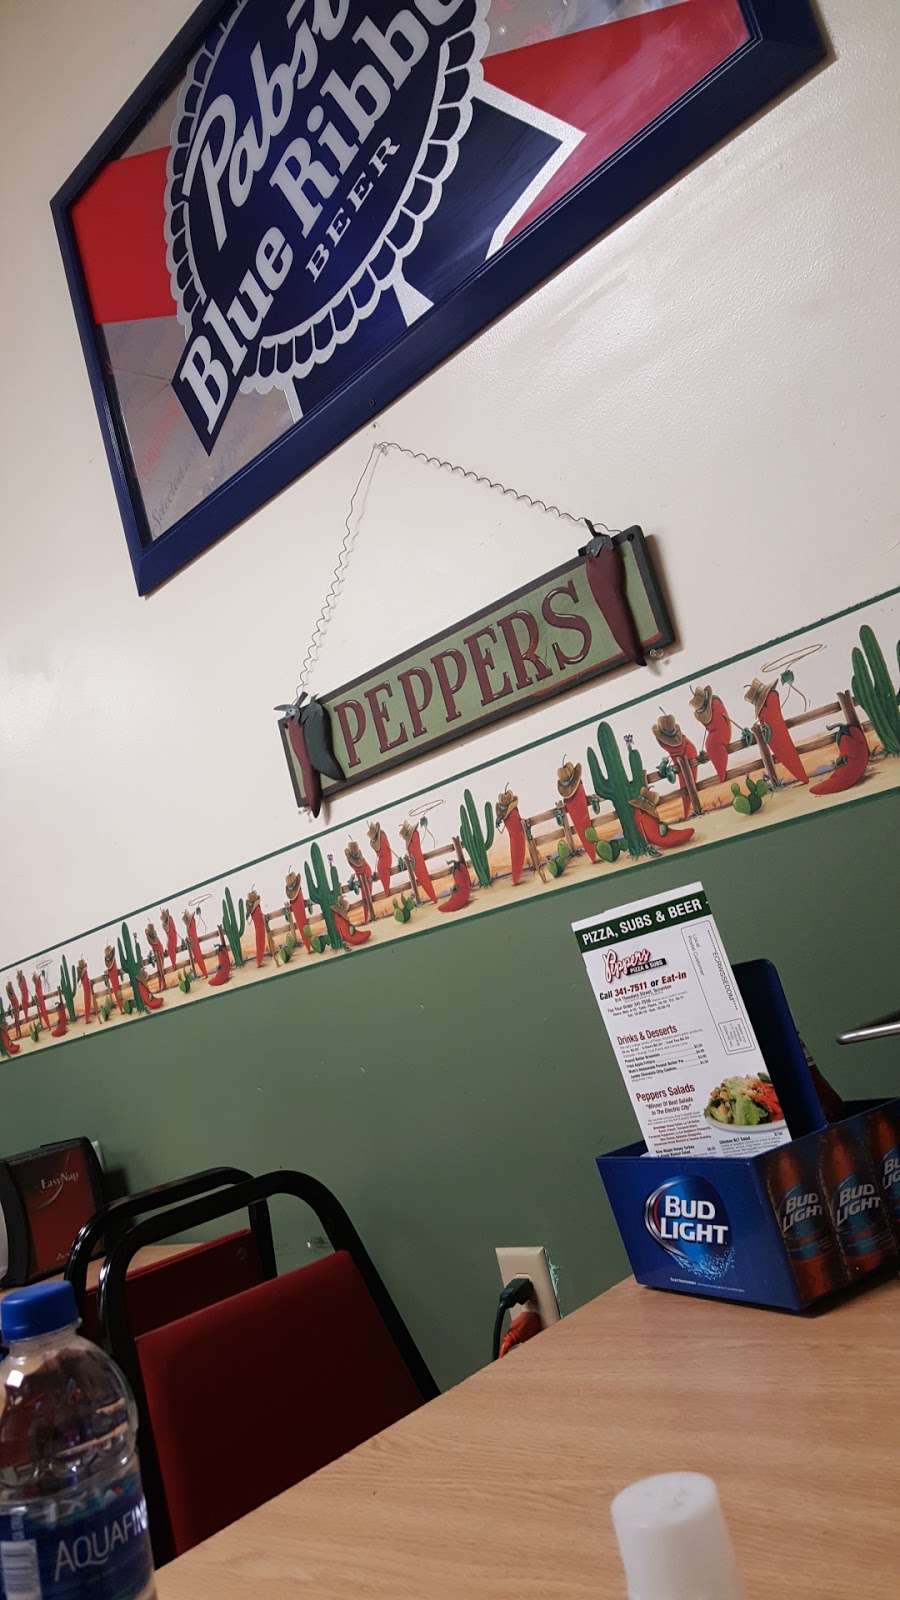 Peppers Pizza & Subs | 814 Theodore St, Scranton, PA 18508 | Phone: (570) 341-7511